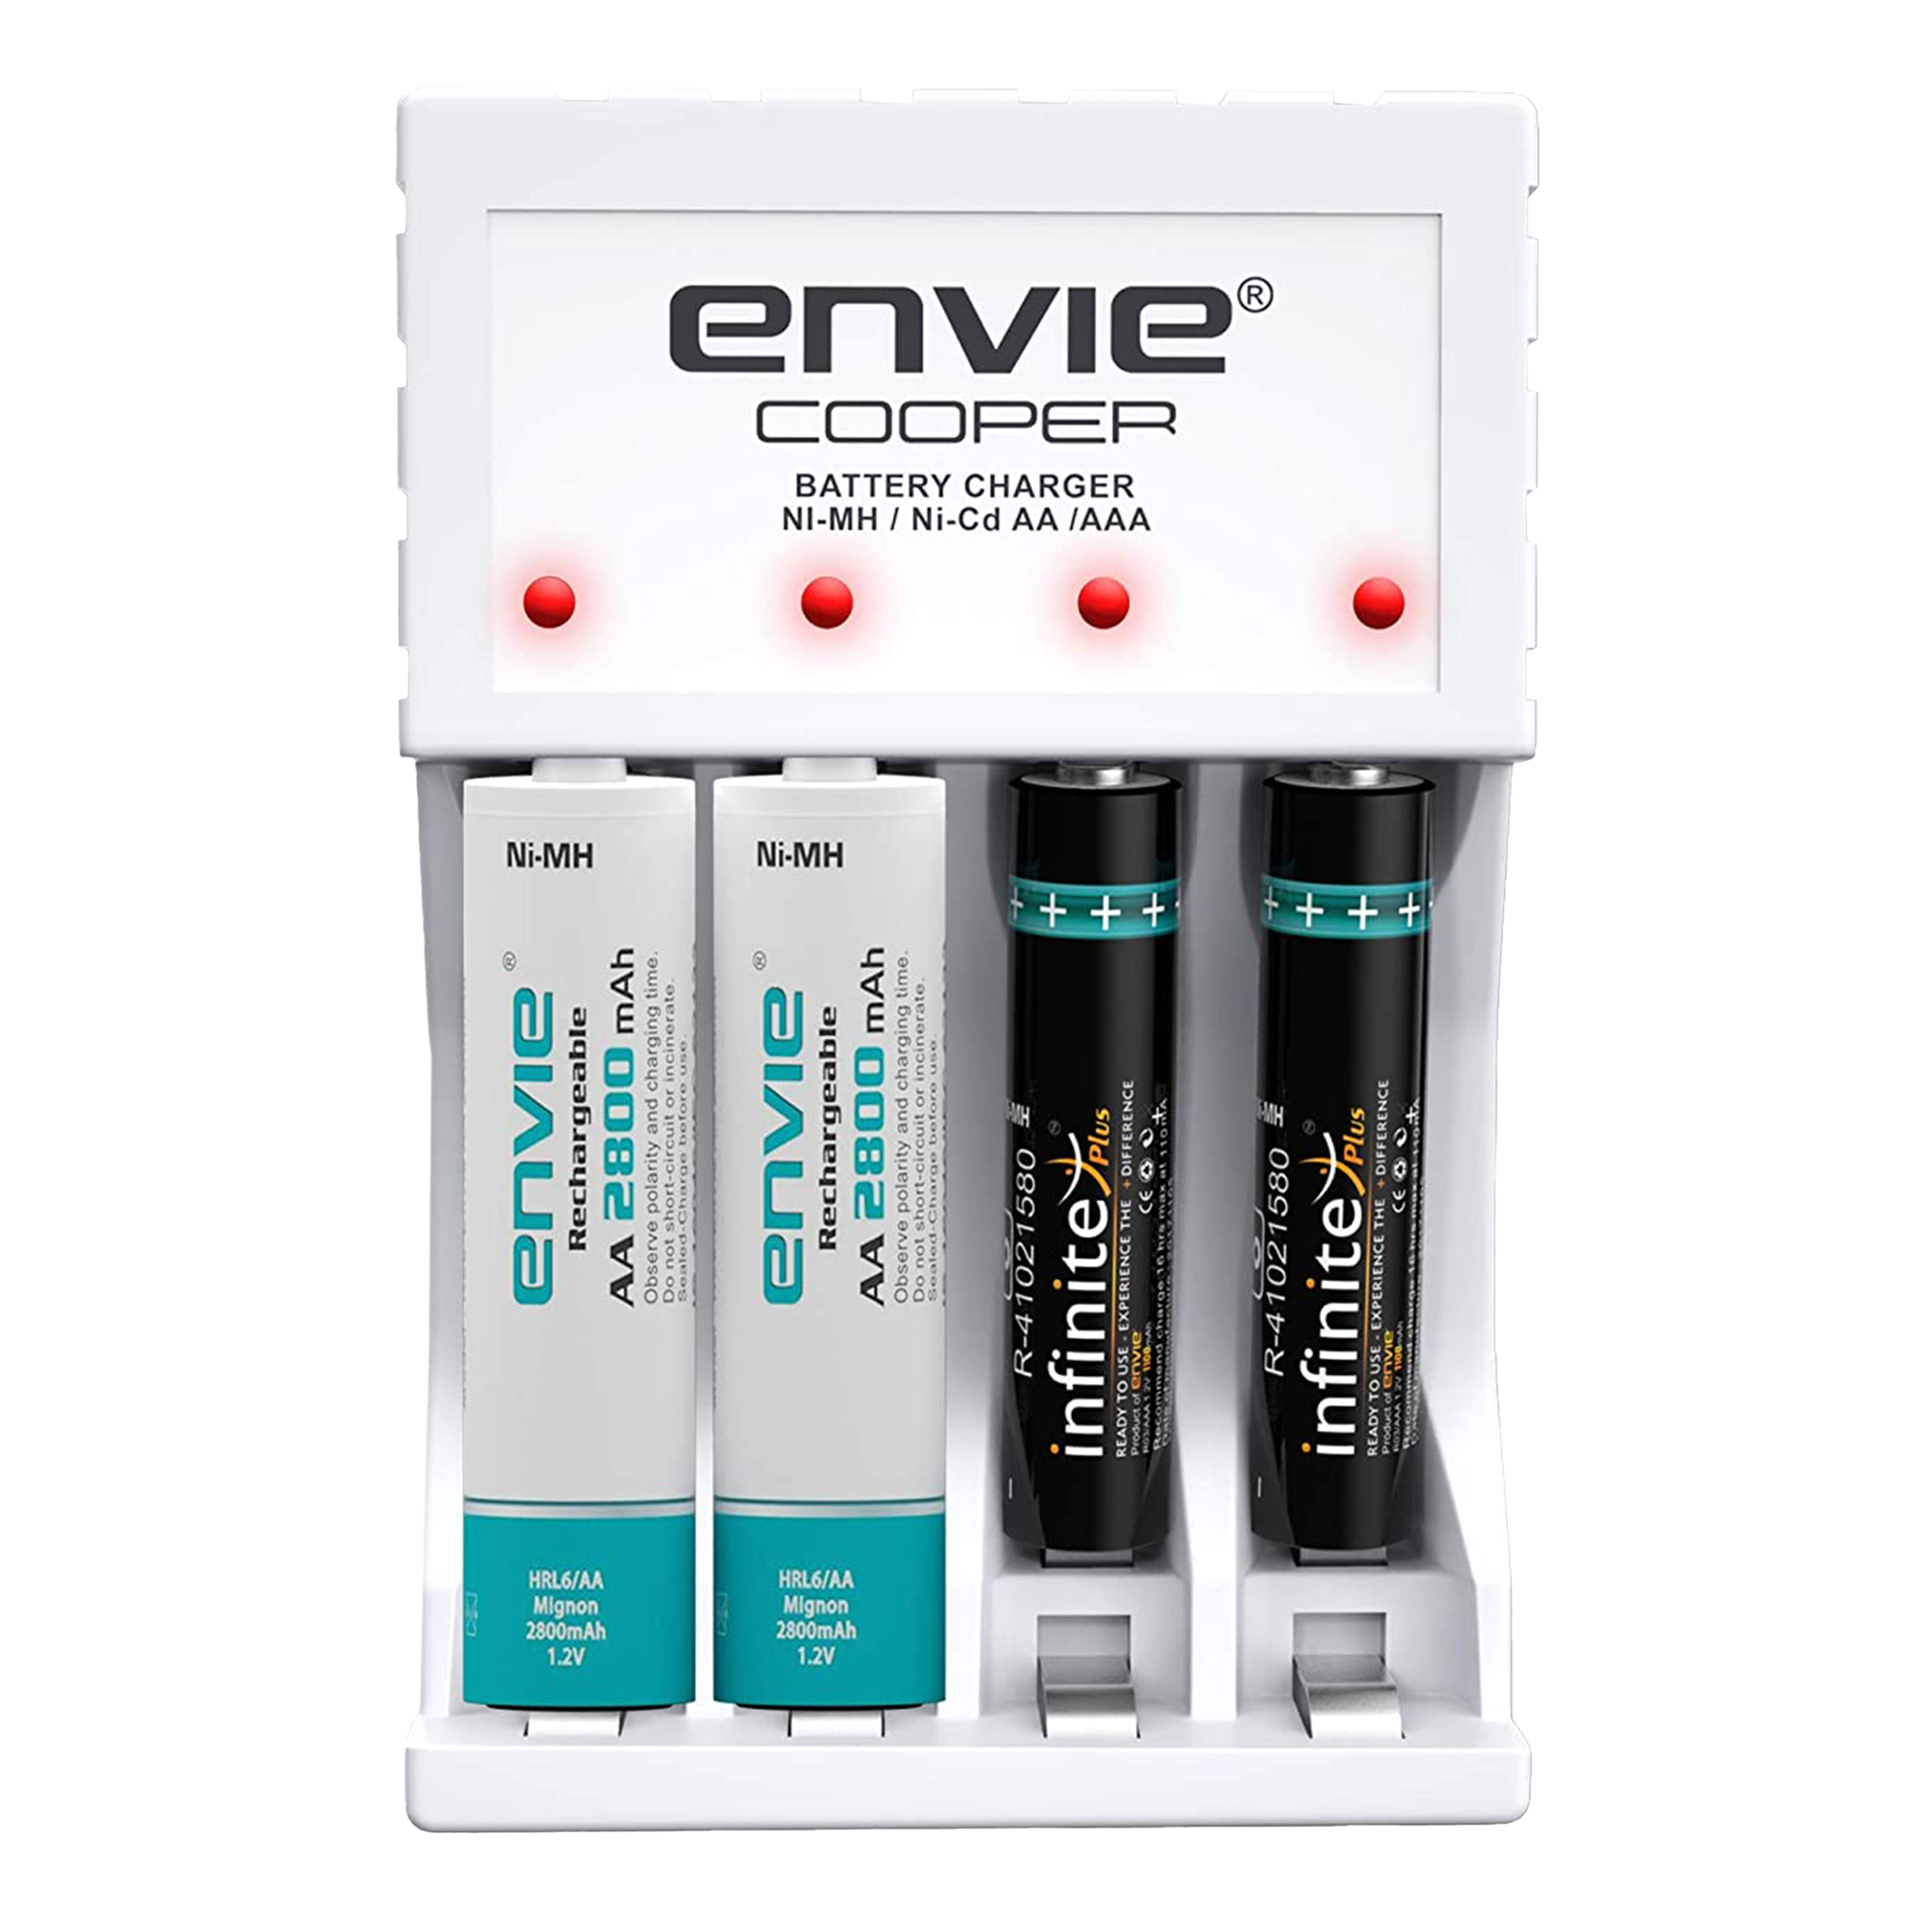 envie Cooper ECR-20 MC Camera Battery Charger Combo for AA2800 and AAA1100 (4-Ports, Short Circuit Protection)